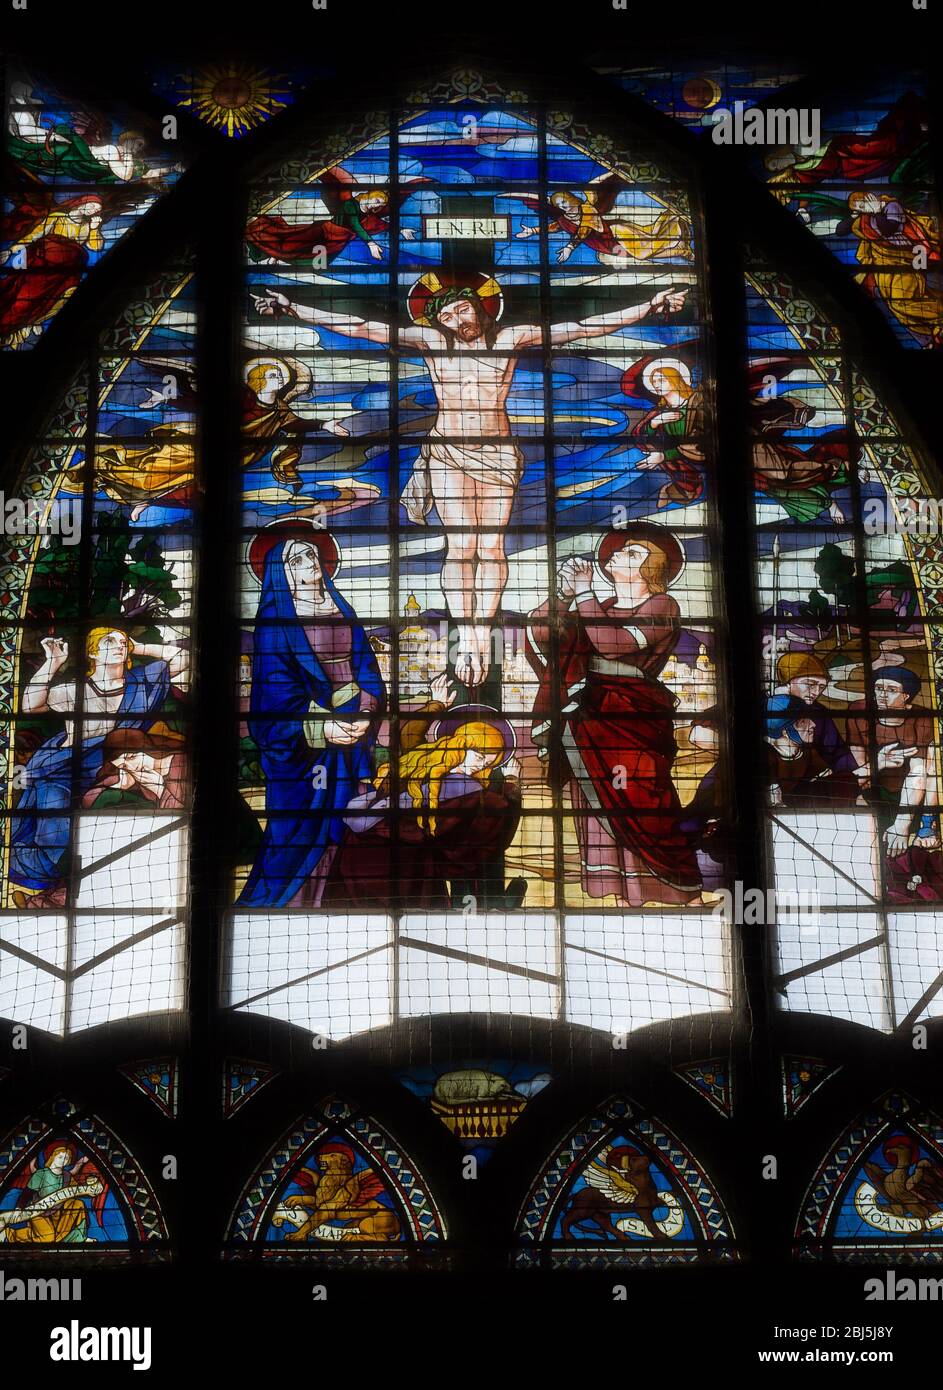 PARIS - SEPT 16, 2014: The Art Nouveau stained glass was executed by Jac Galland according to the design of Pascal Blanchard. The Church of Saint-Jean Stock Photo